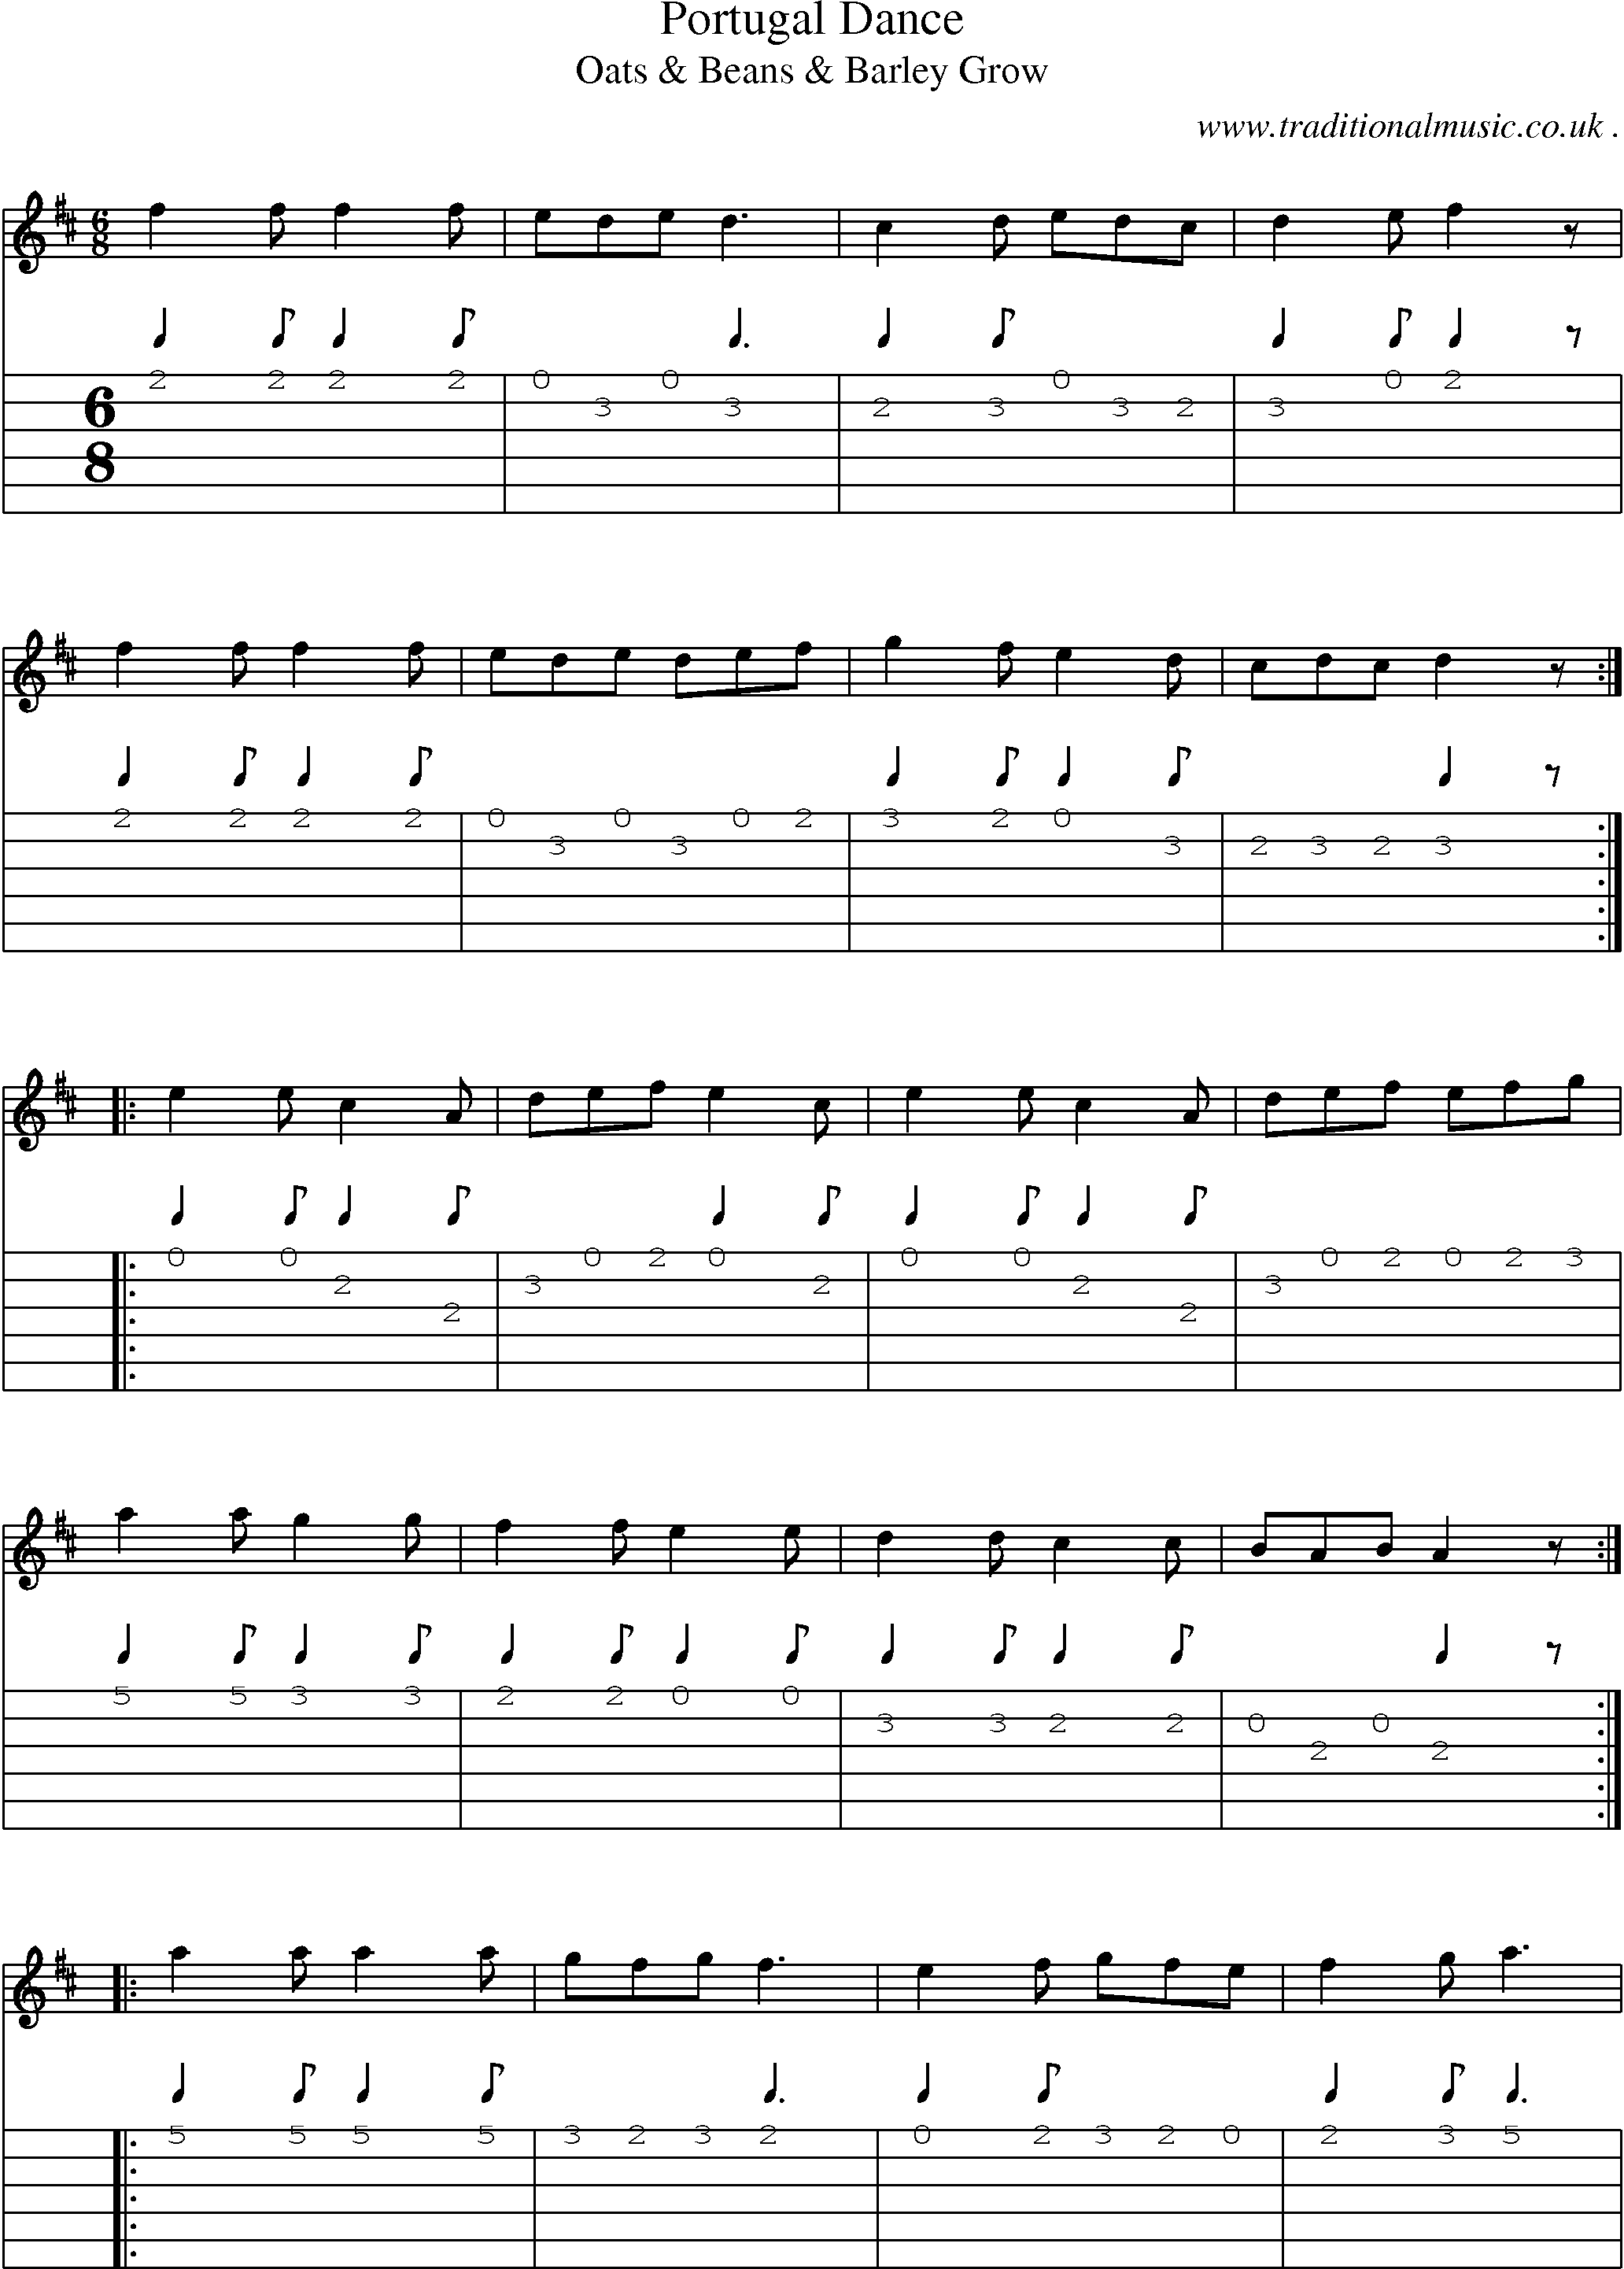 Sheet-Music and Guitar Tabs for Portugal Dance